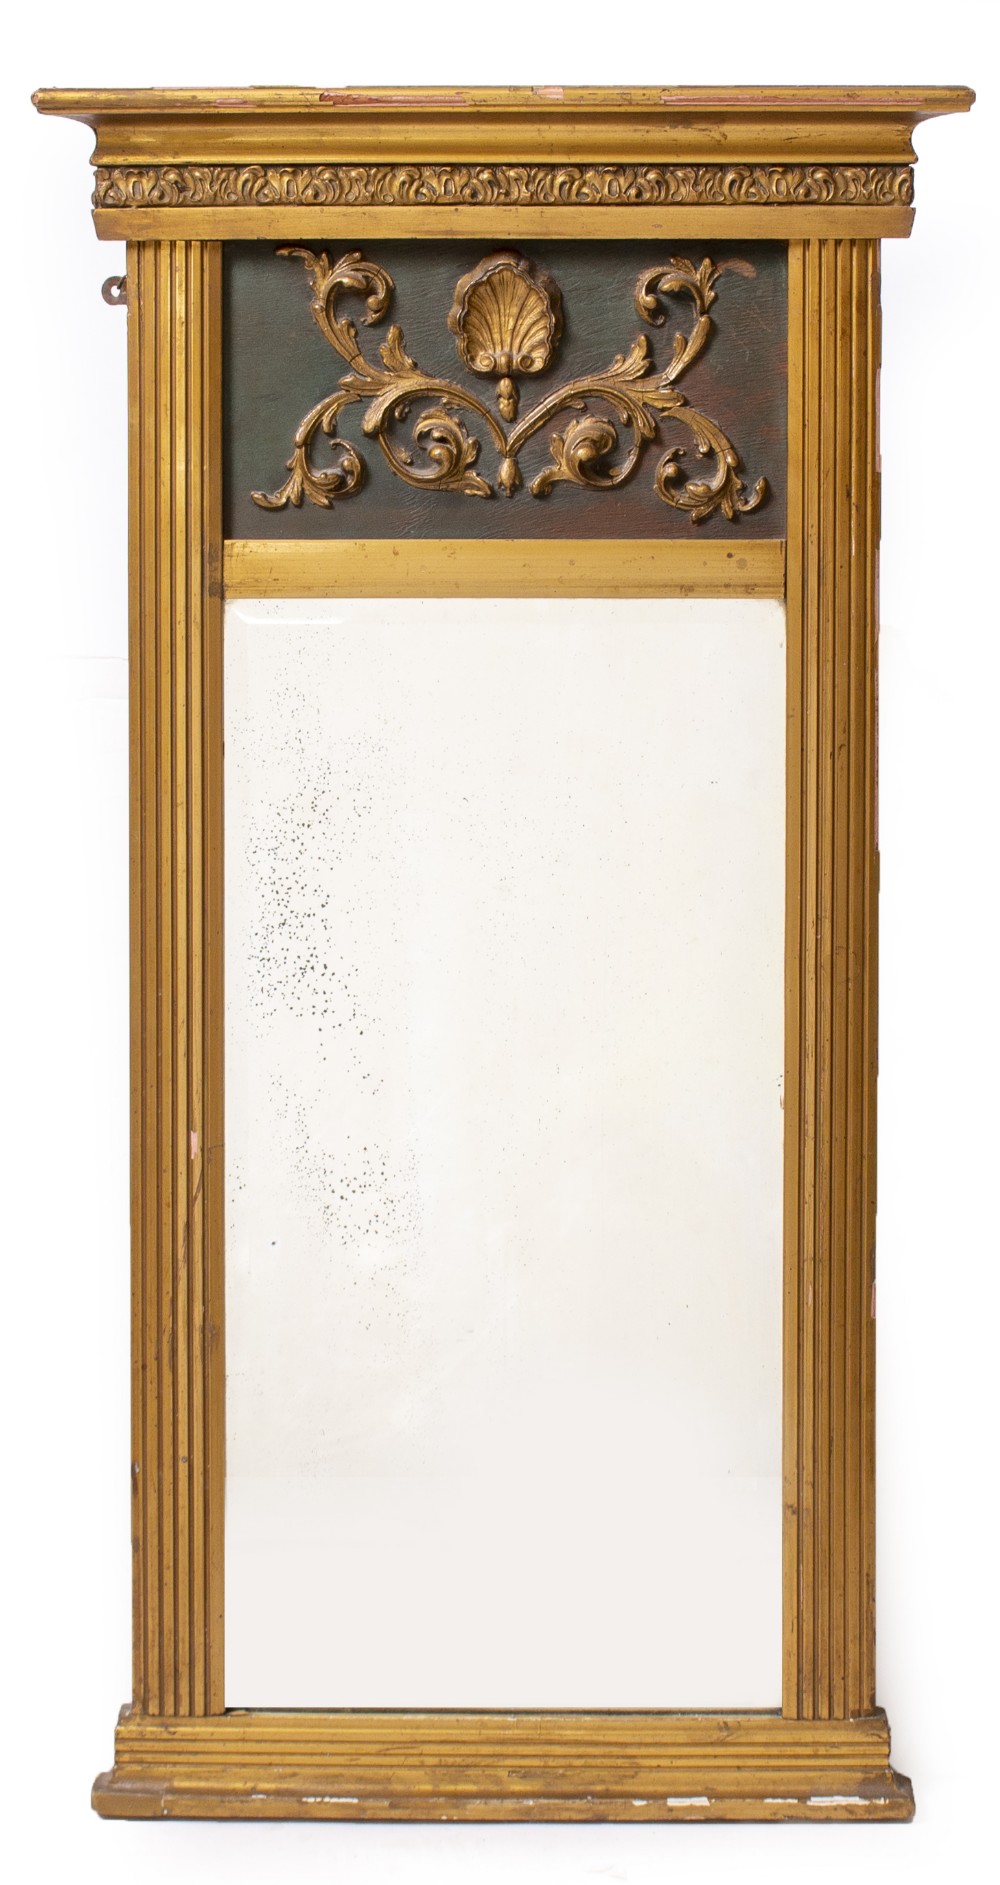 A 19TH CENTURY GILT FRAMED WALL MIRROR with gilded gesso scallop shell and acanthus leaf decoration,